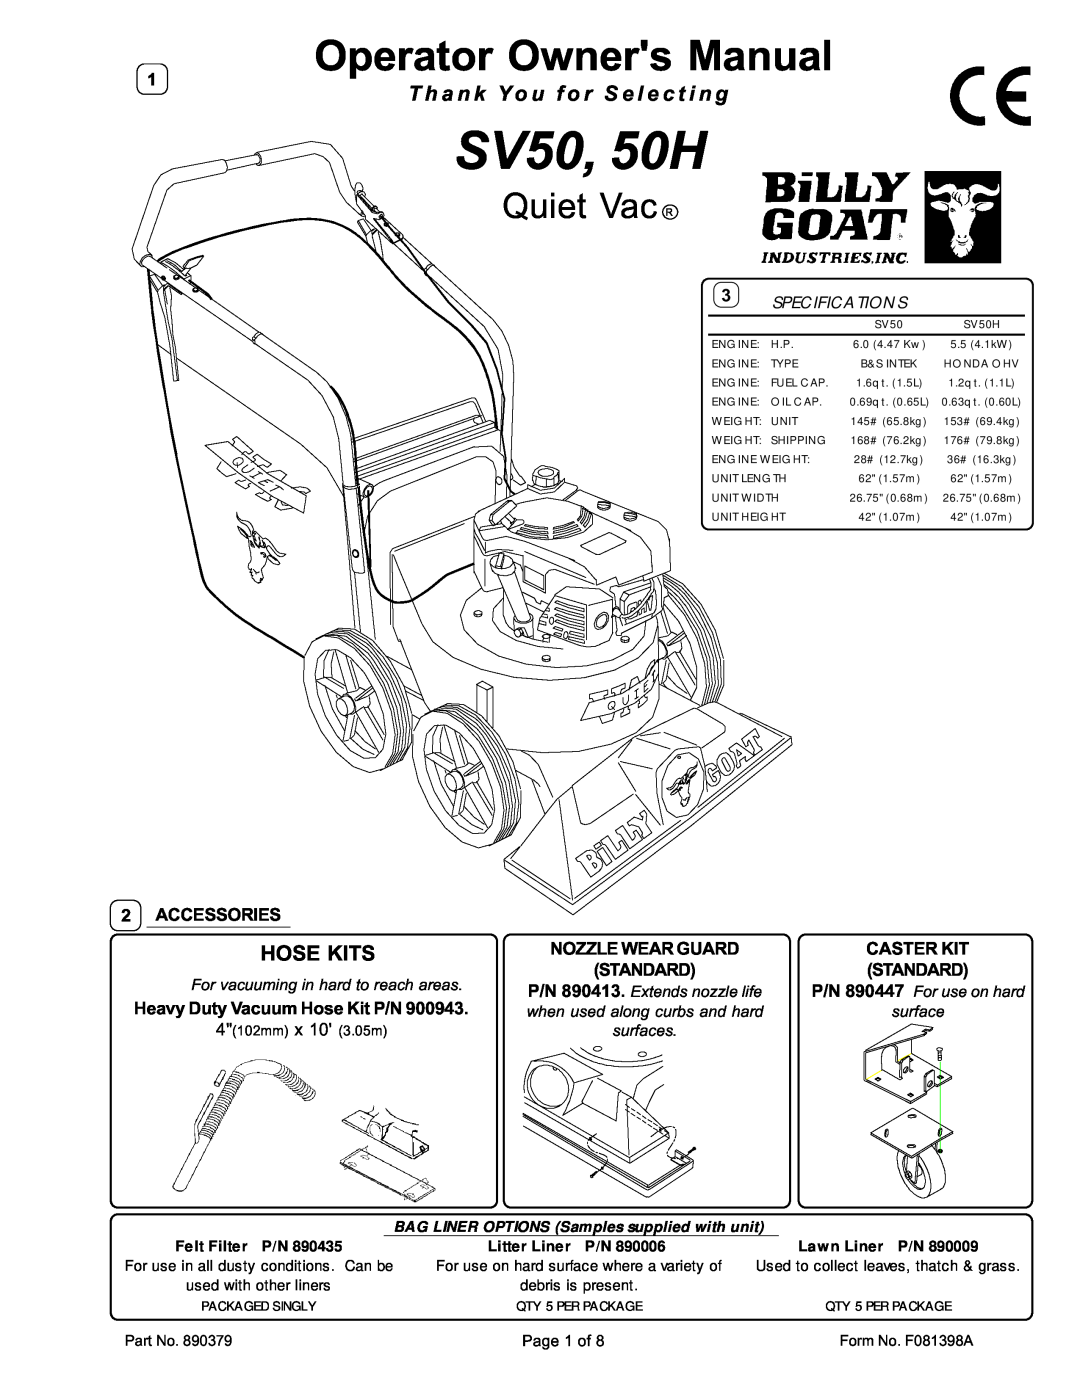 Billy Goat SV50H owner manual Quiet Vac R, T h a n k Yo u f o r S e l e c t i n g, Hose Kits, 2ACCESSORIES, Caster Kit 